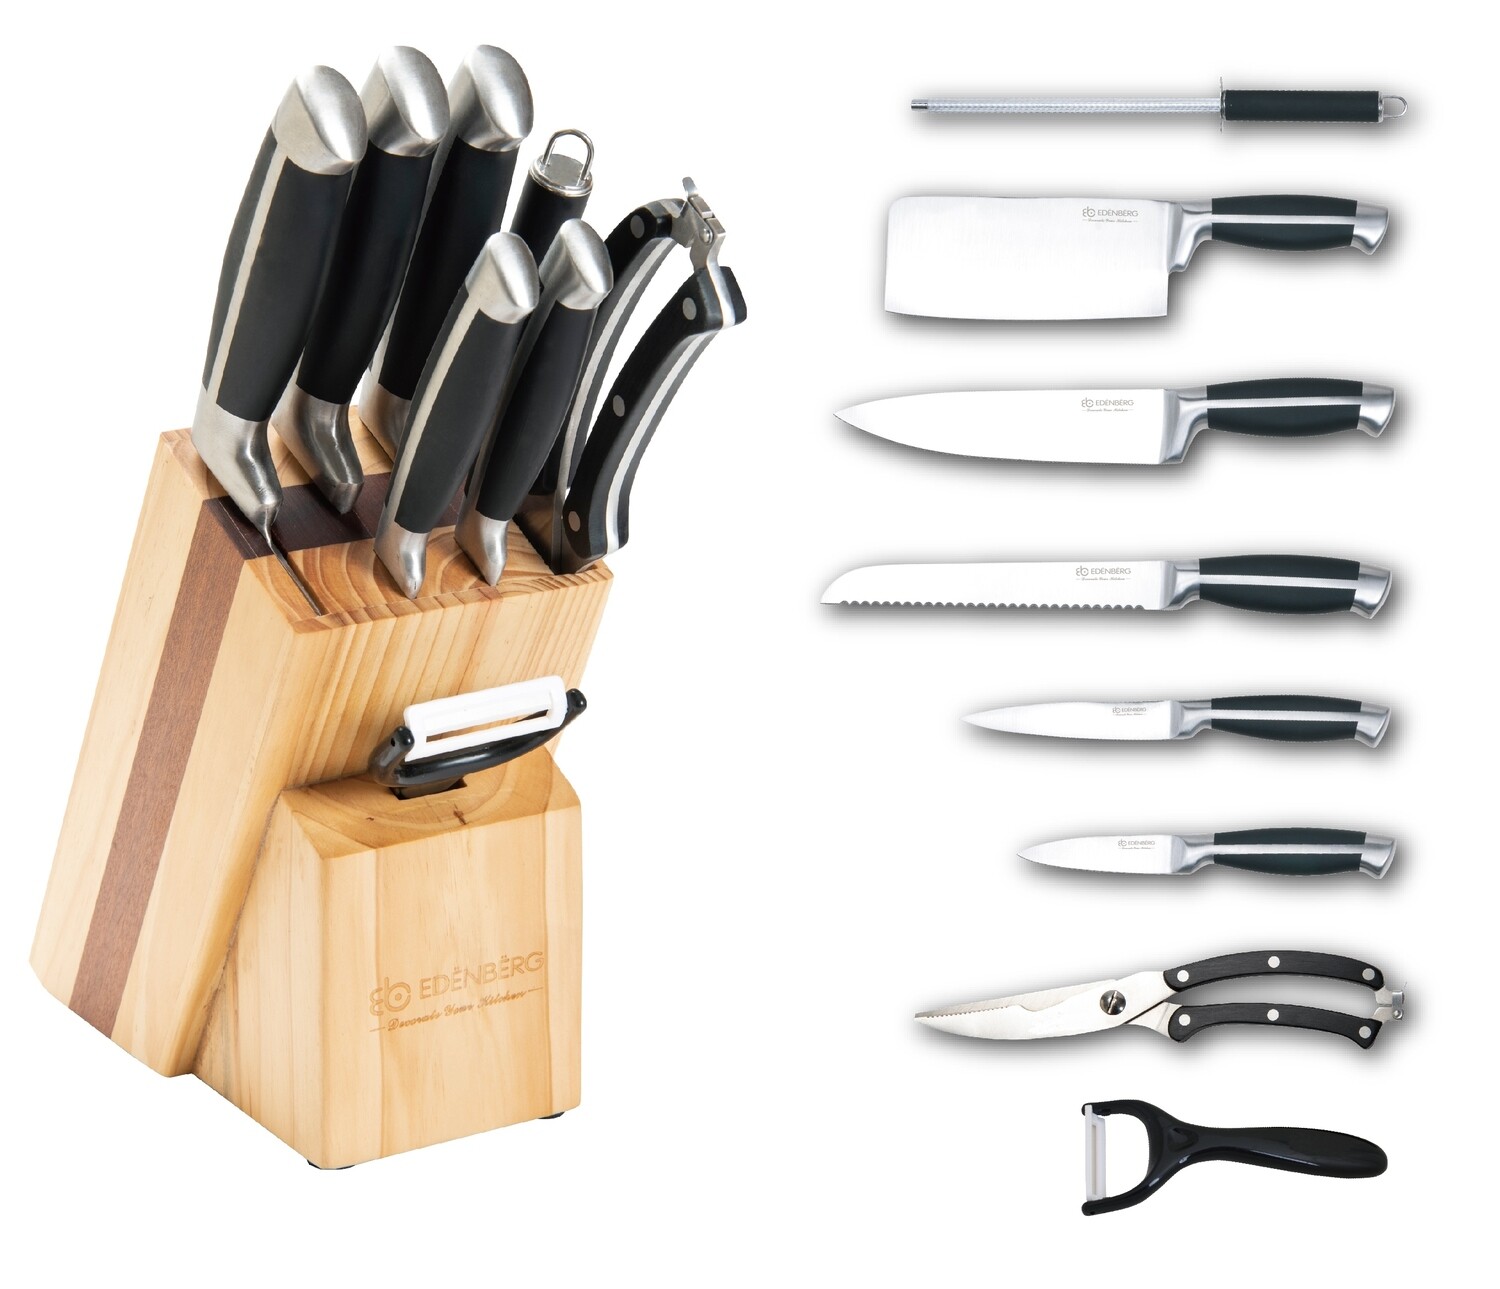 Edenberg Stainless Steel Kitchen 9pcs Knife Set with C Hollow Rubber Handle, Pinewood + Sapele Wood Block EB-3612